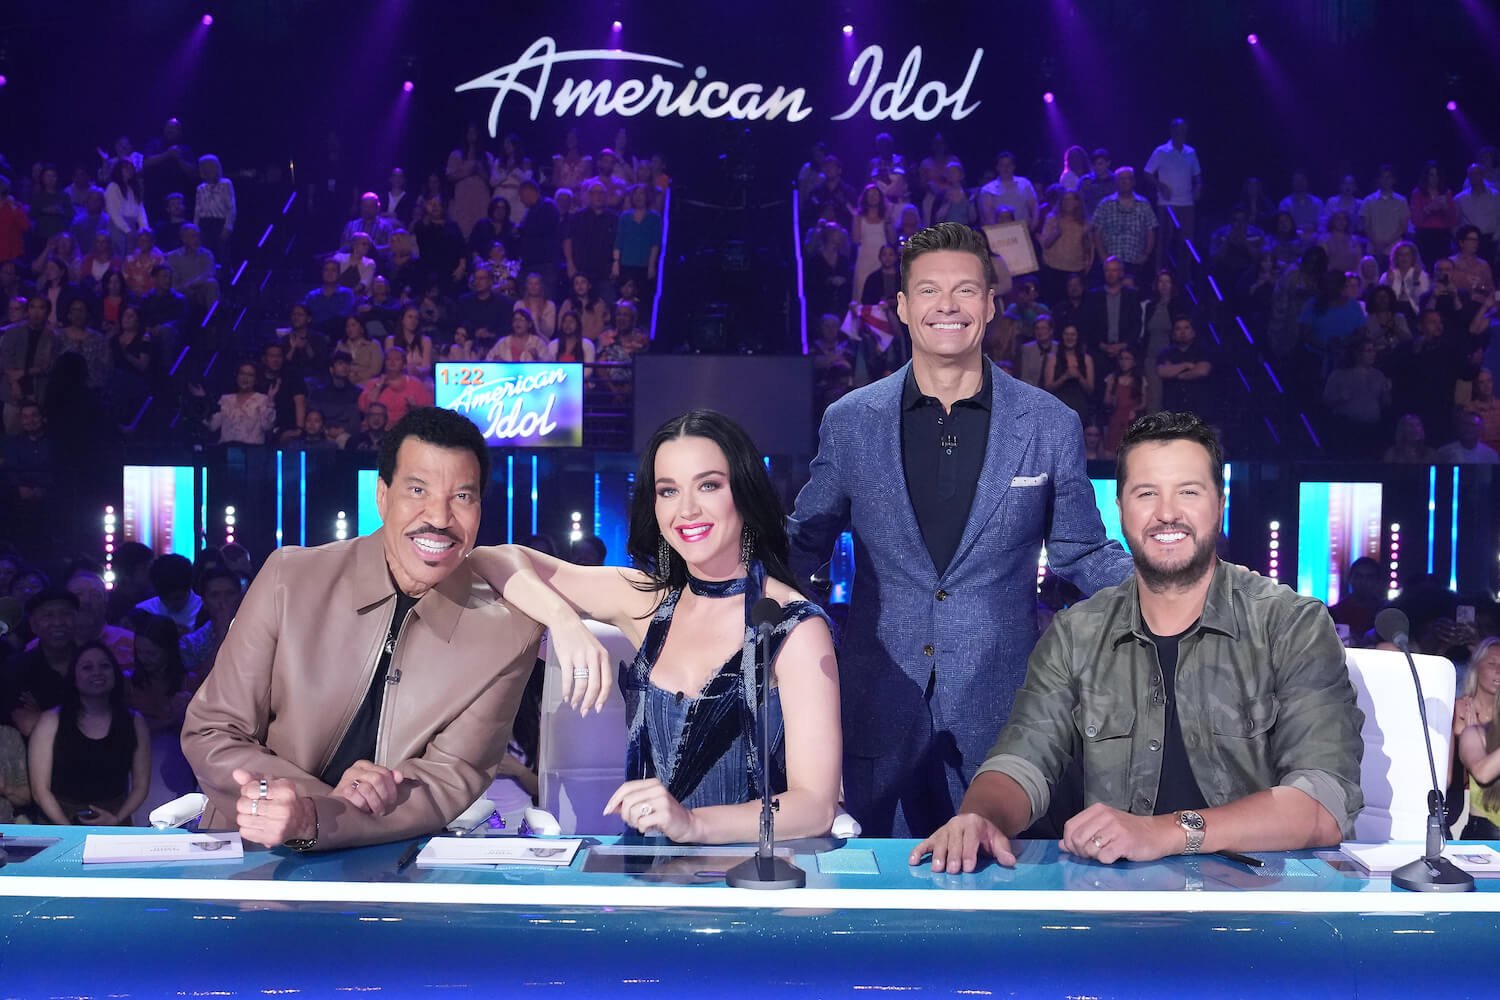 'American Idol' host Ryan Seacrest standing next to Lionel Richie, Katy Perry, and Luke Bryan